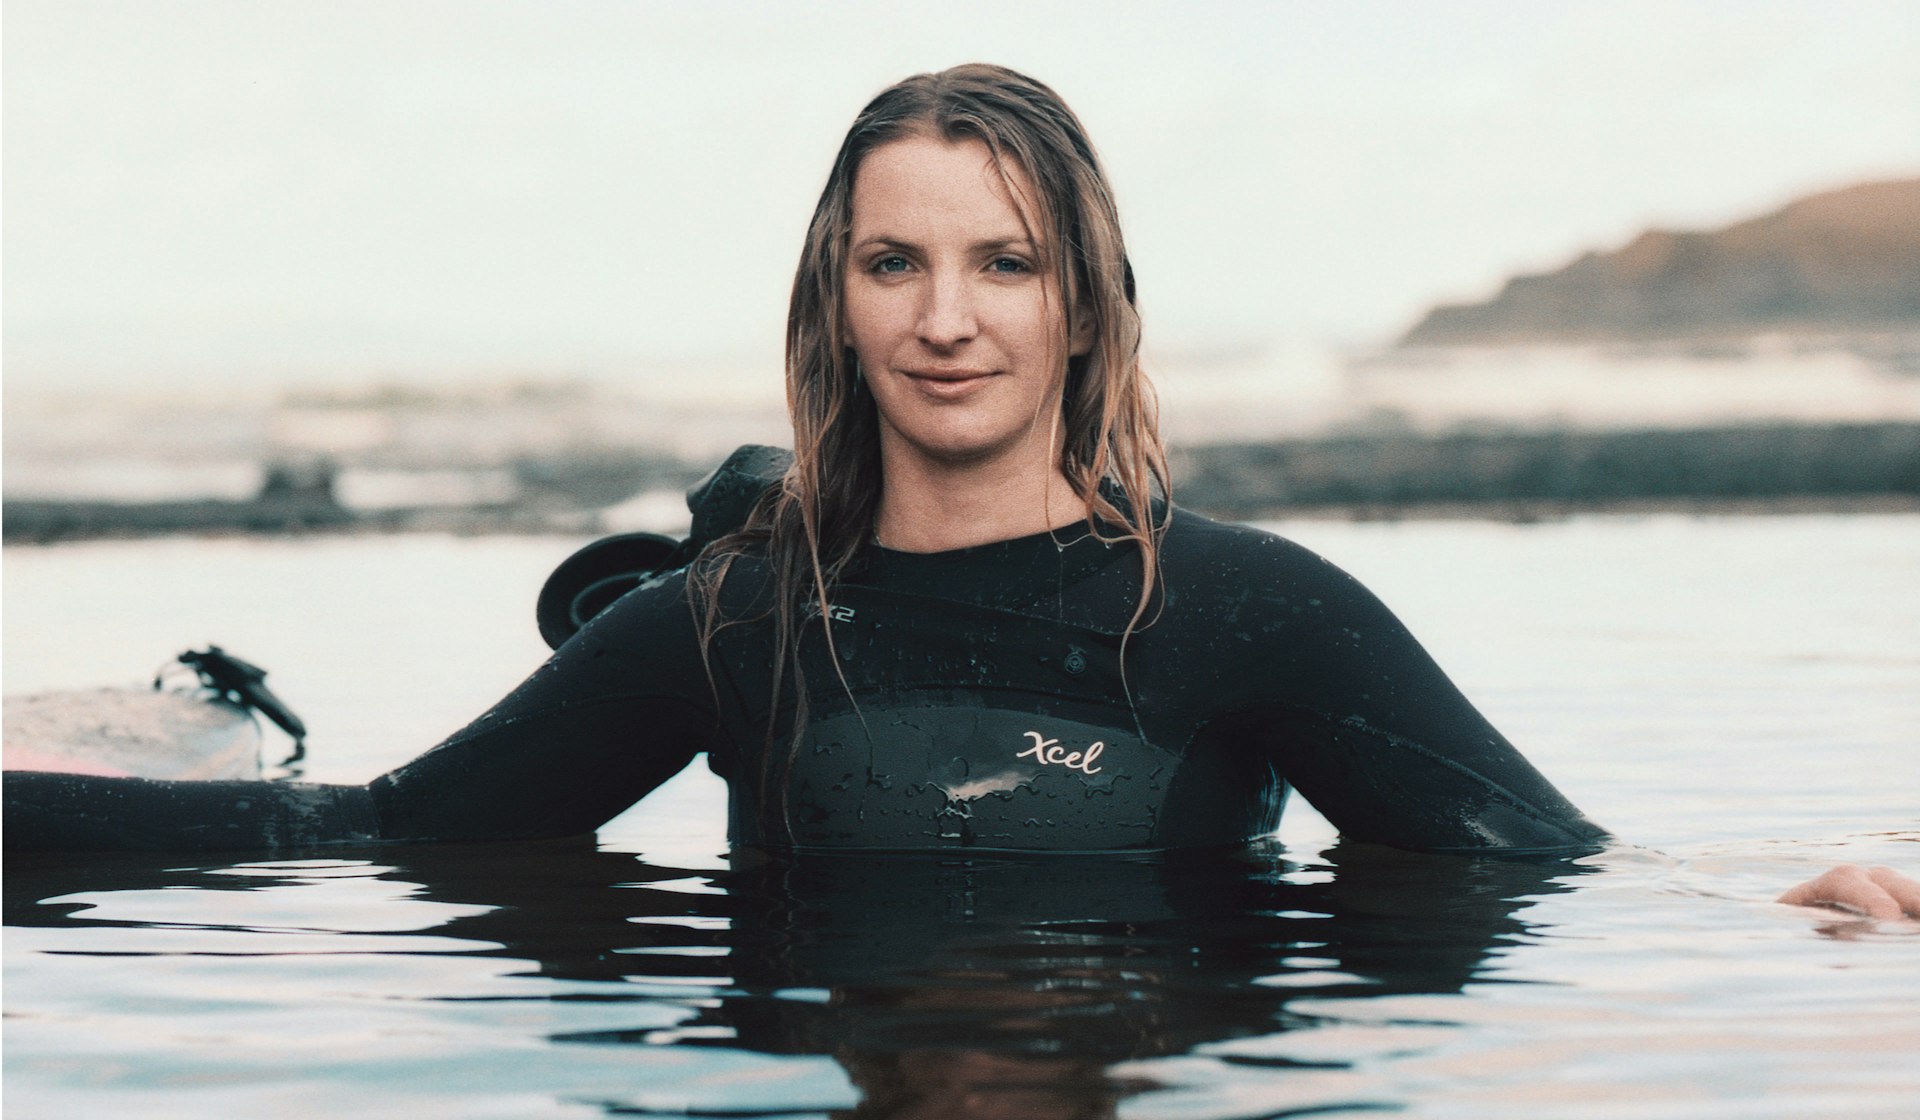 From Ireland to Iran, Easkey Britton is connecting the world through surfing